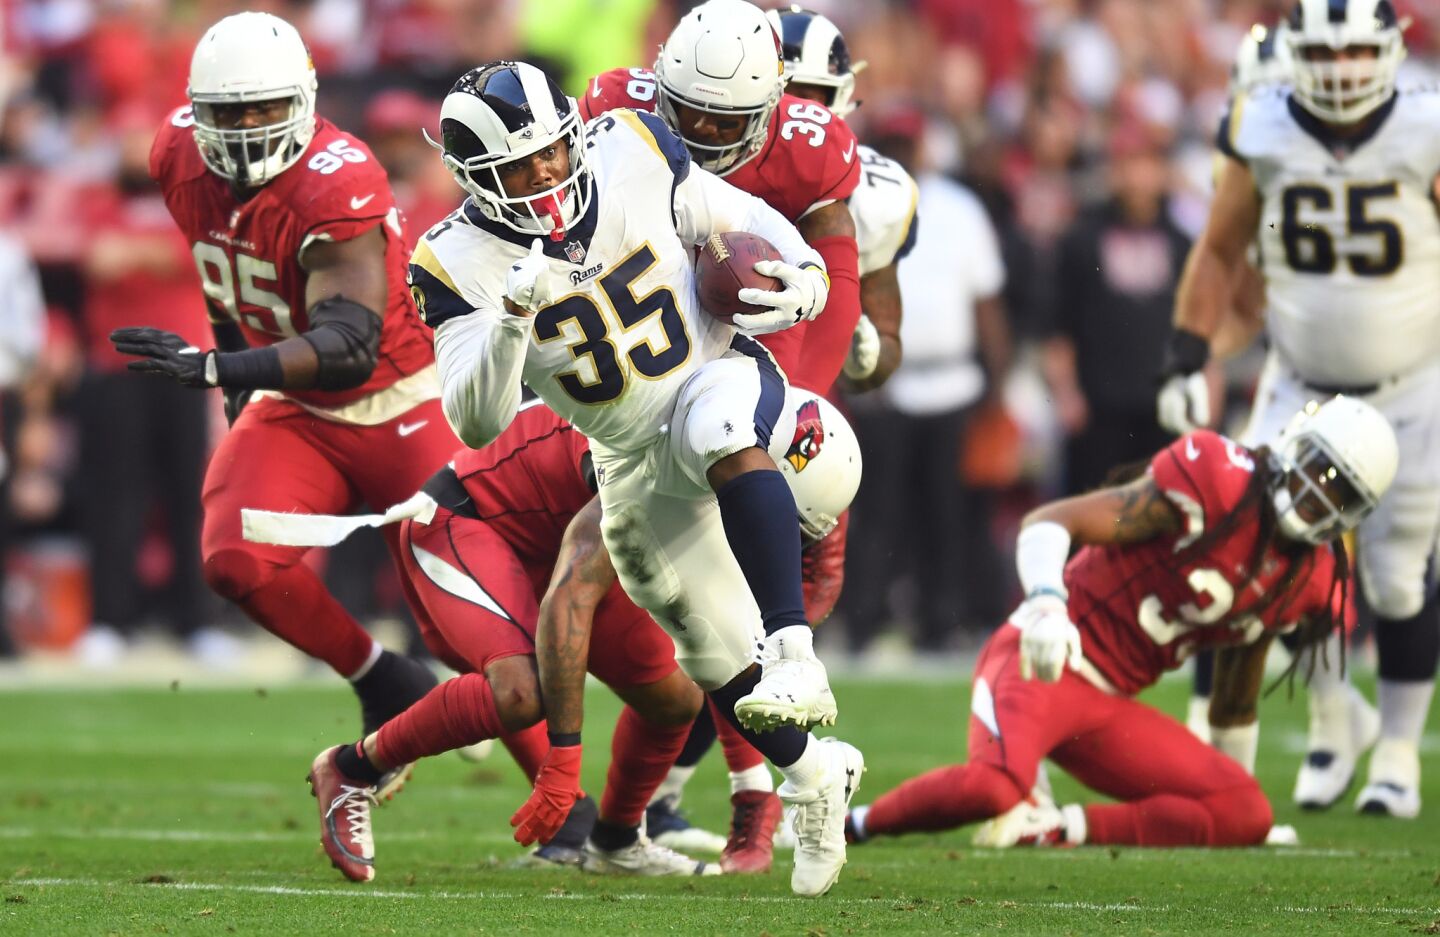 Rams running back C.J. Anderson picks up big yards against the Arizona Cardinals in the second quarter at State Farm Stadium on Sunday in Glendale, Ariz.